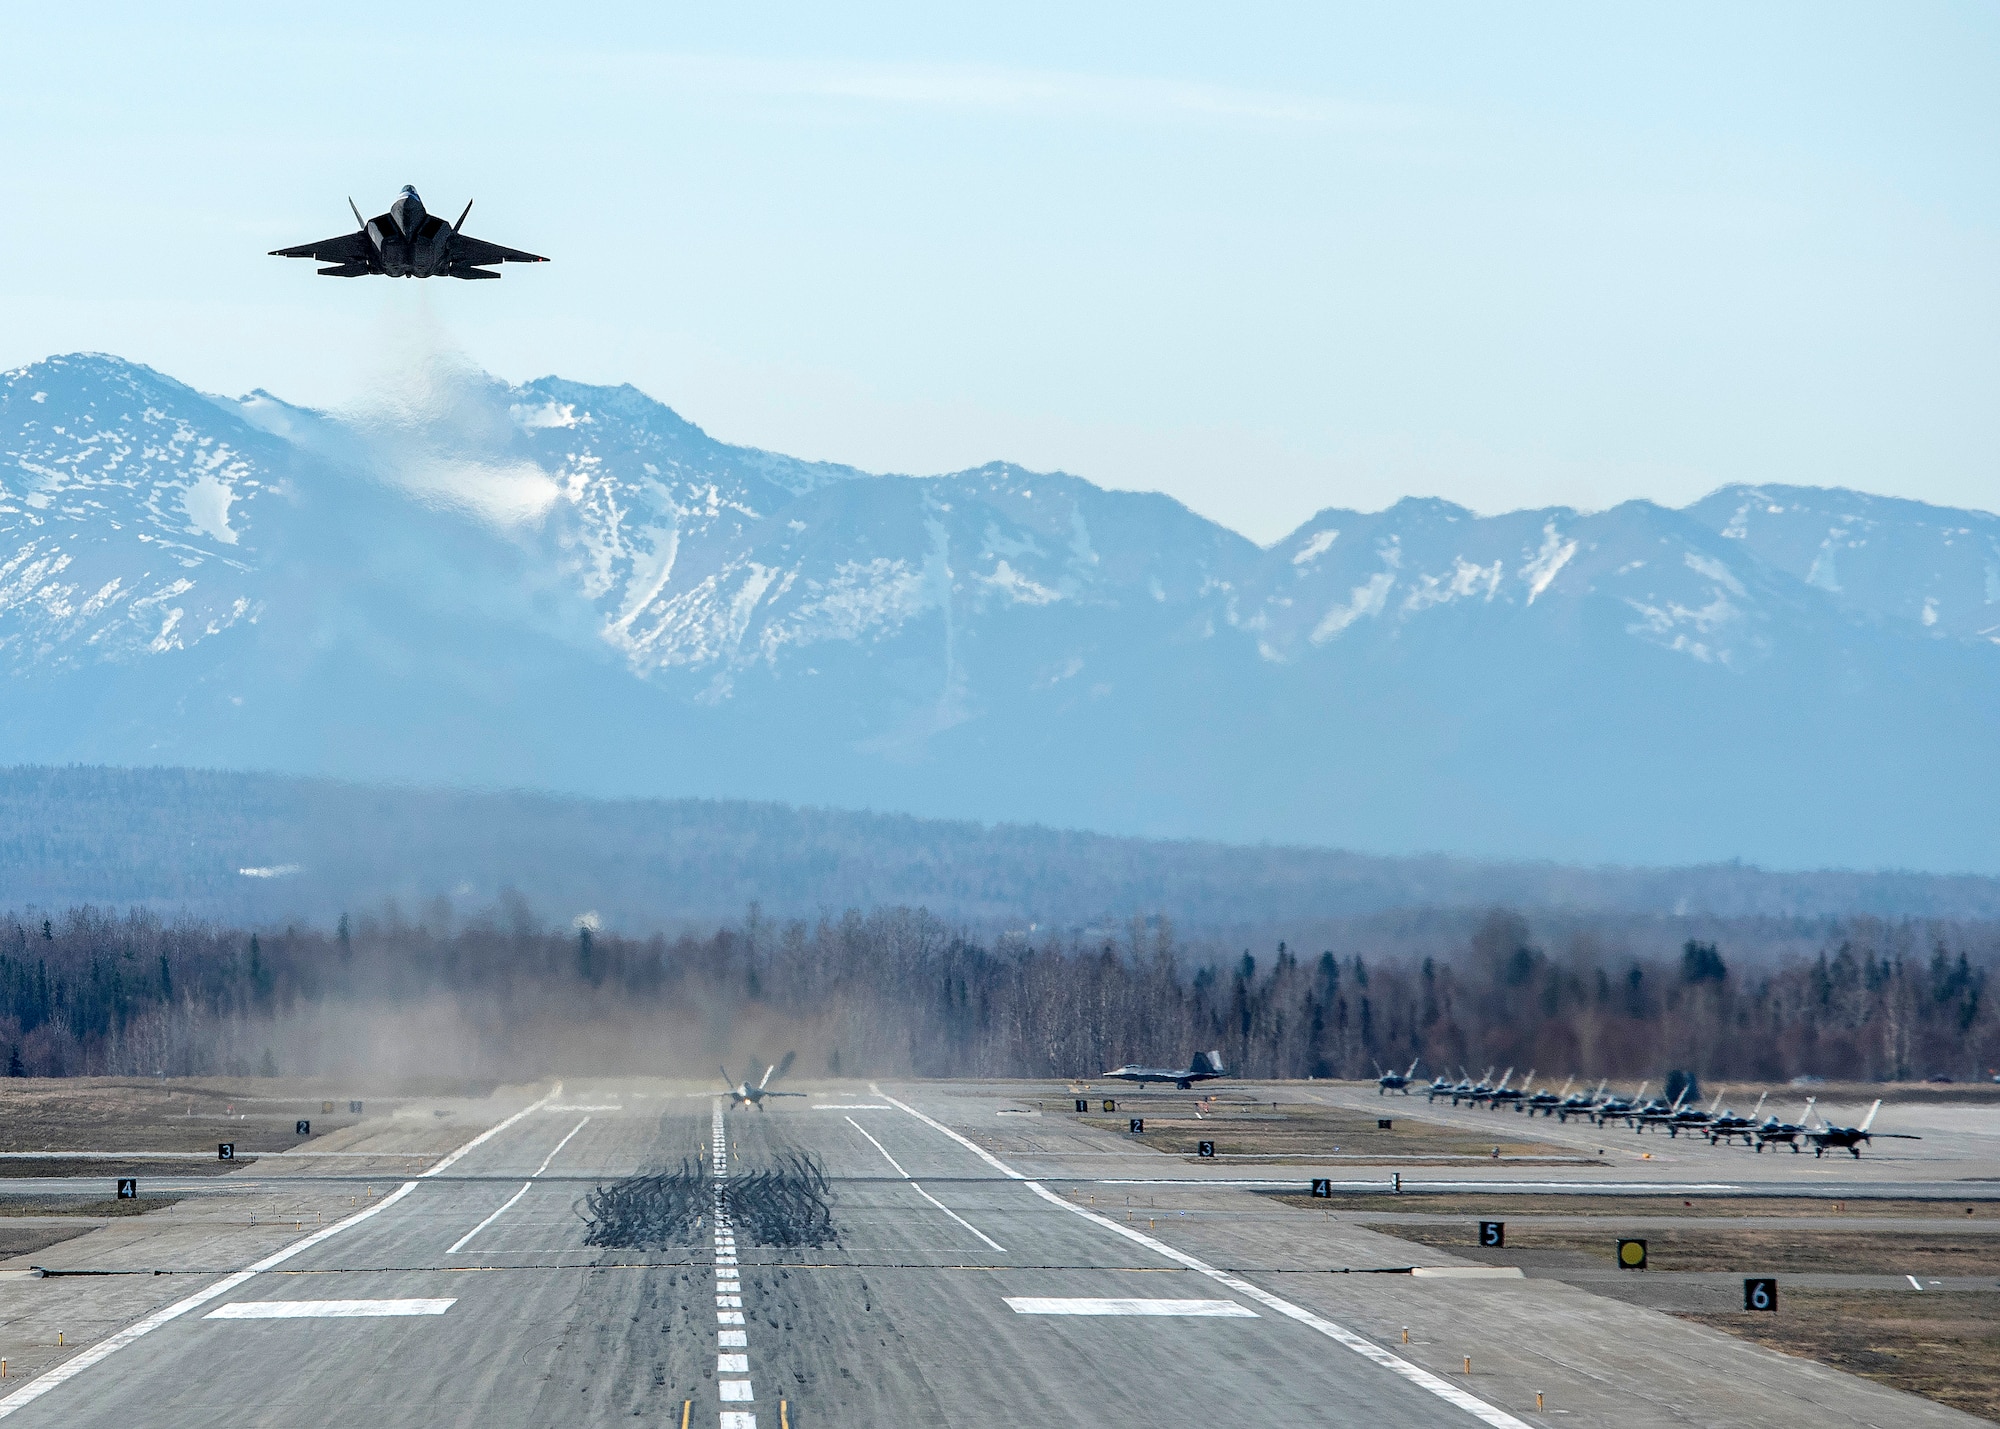 A U.S. Air Force F-22 Raptor takes off while other Raptors taxi to the runway following a close formation taxi known as an elephant walk, at Joint Base Elmendorf-Richardson, Alaska, May 5, 2020. This event displayed the ability of the 3rd Wing, 176th Wing and the 477th Fighter Group to maintain constant readiness throughout COVID-19 by Total Force Integration between active-duty, Guard and Reserve units to continue defending the U.S. homeland and ensuring a free and open Indo-Pacific.